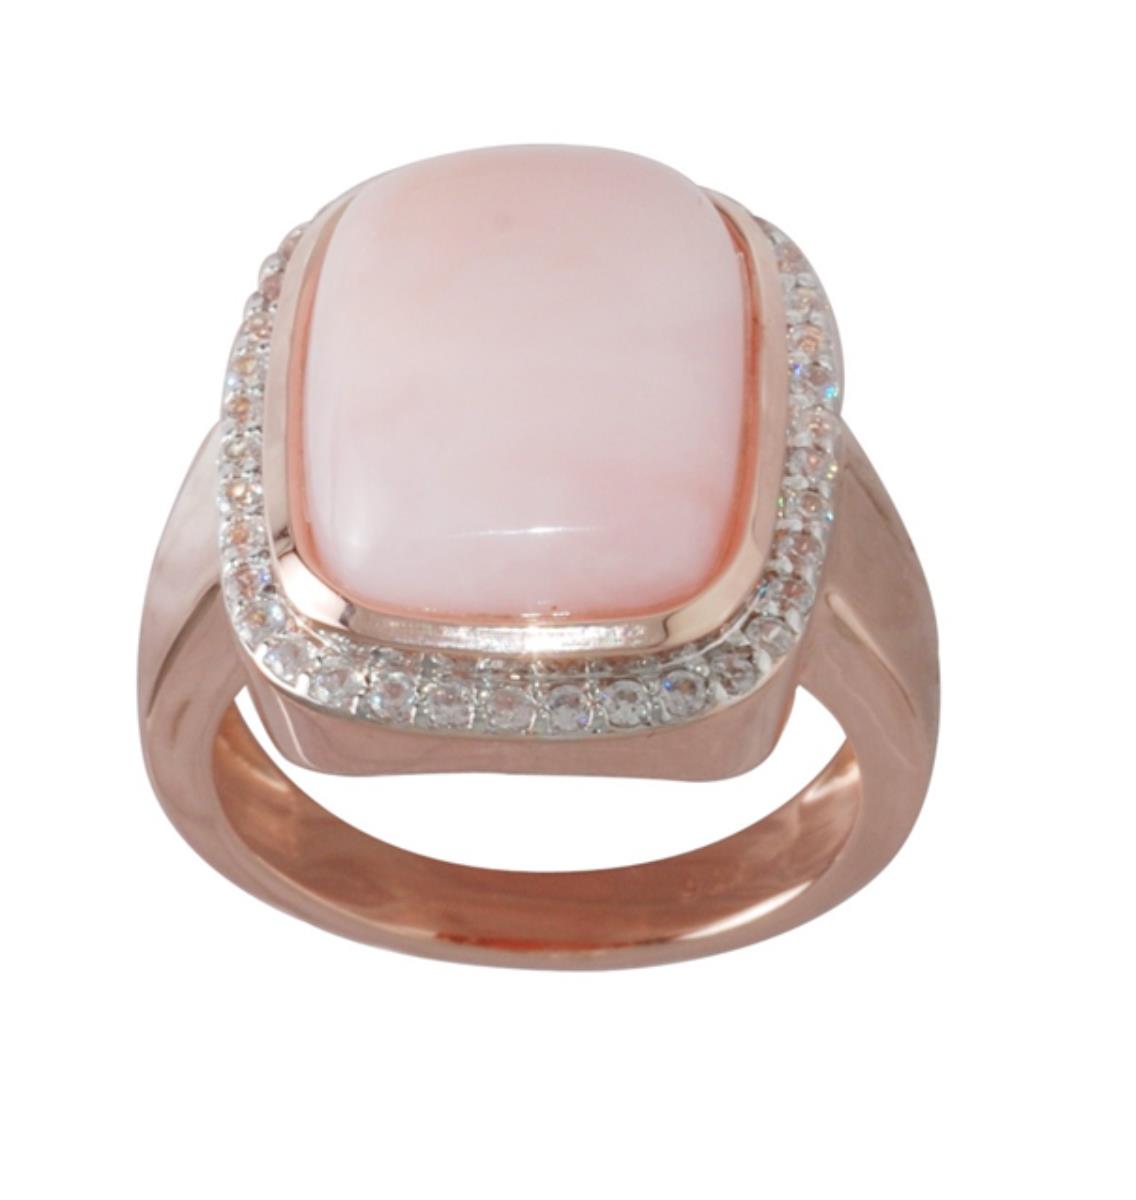 10K Rose Gold 16x12mm Cushion Cut Pink Opal with White Zircon Halo Fashion Ring